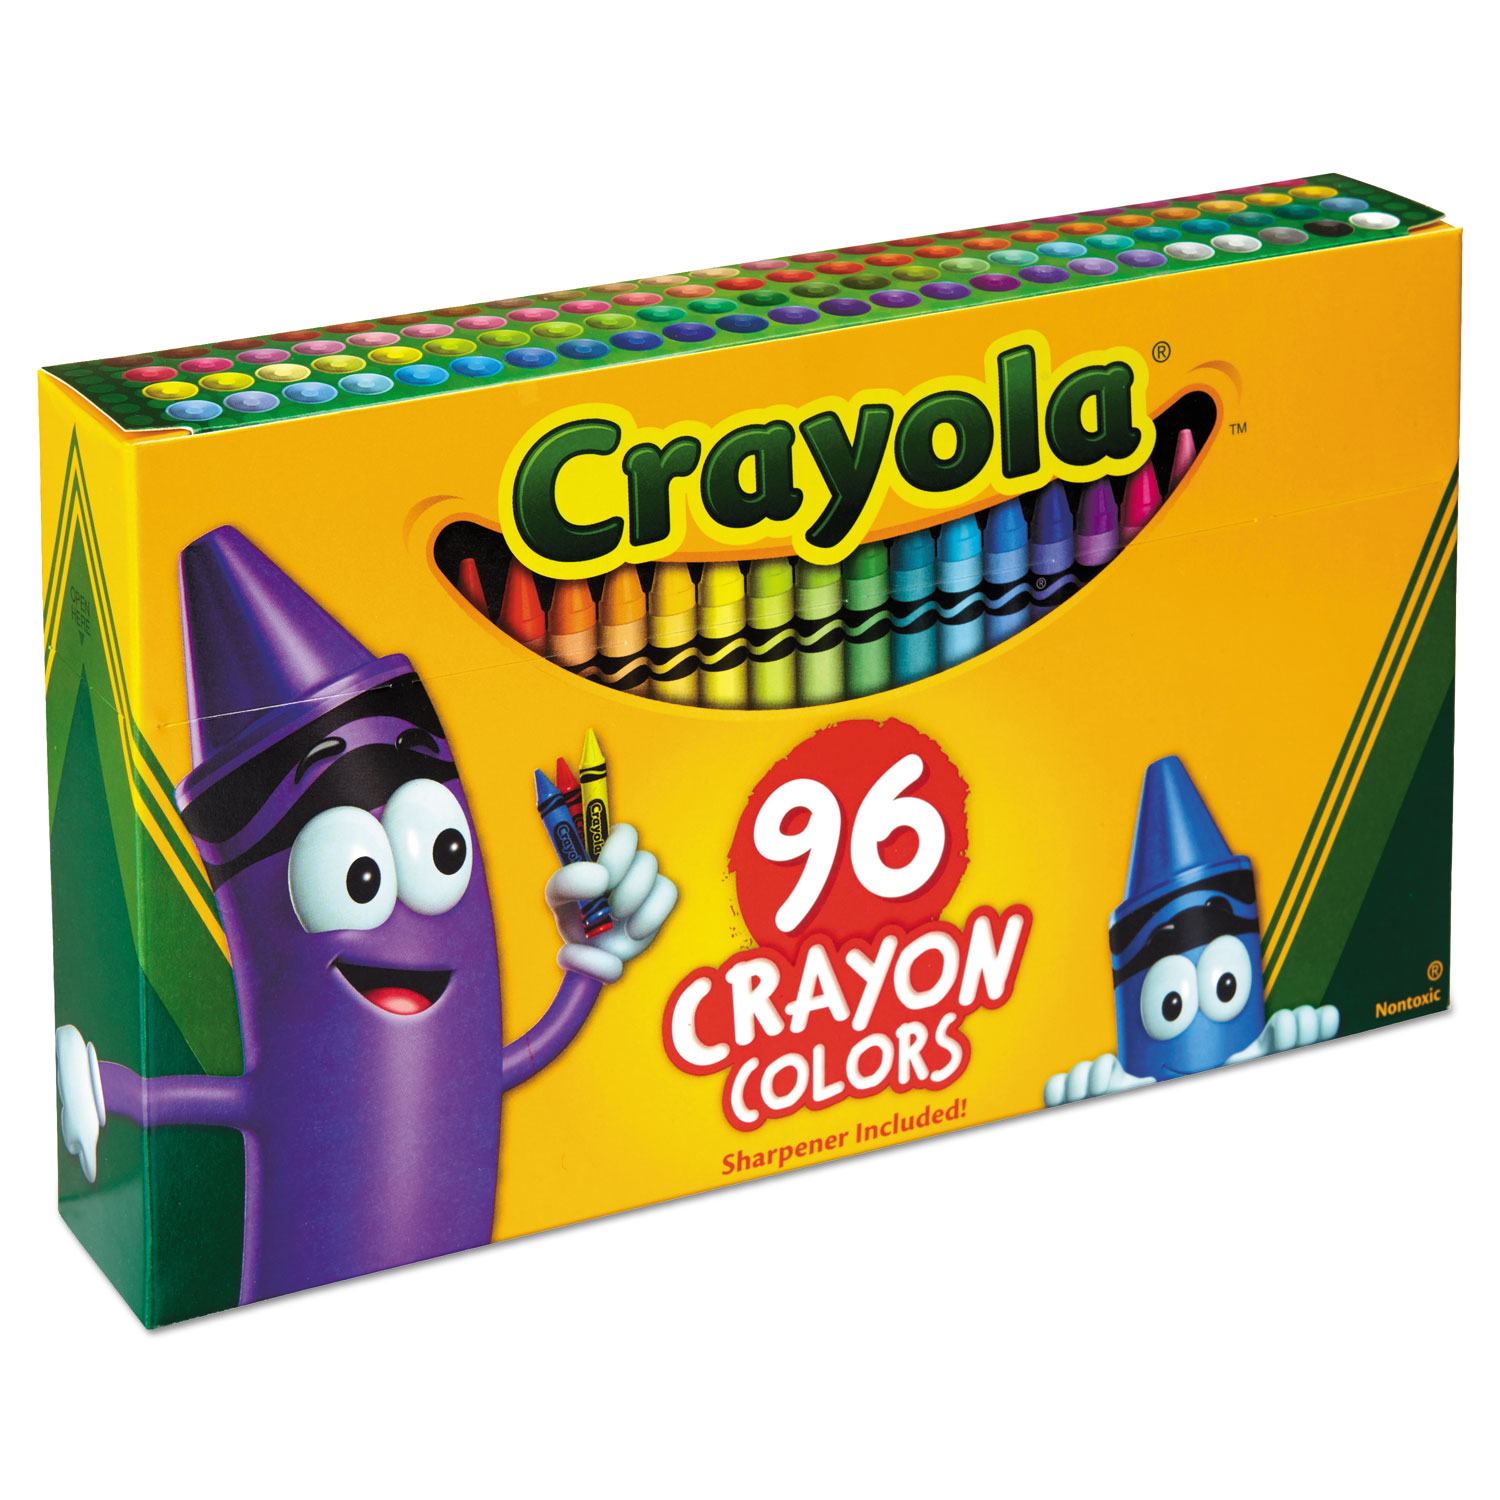 Classic Color Crayons in Flip-Top Pack with Sharpener, 64 Colors/Pack | Bundle of 5, Size: 3.63 x 0.31